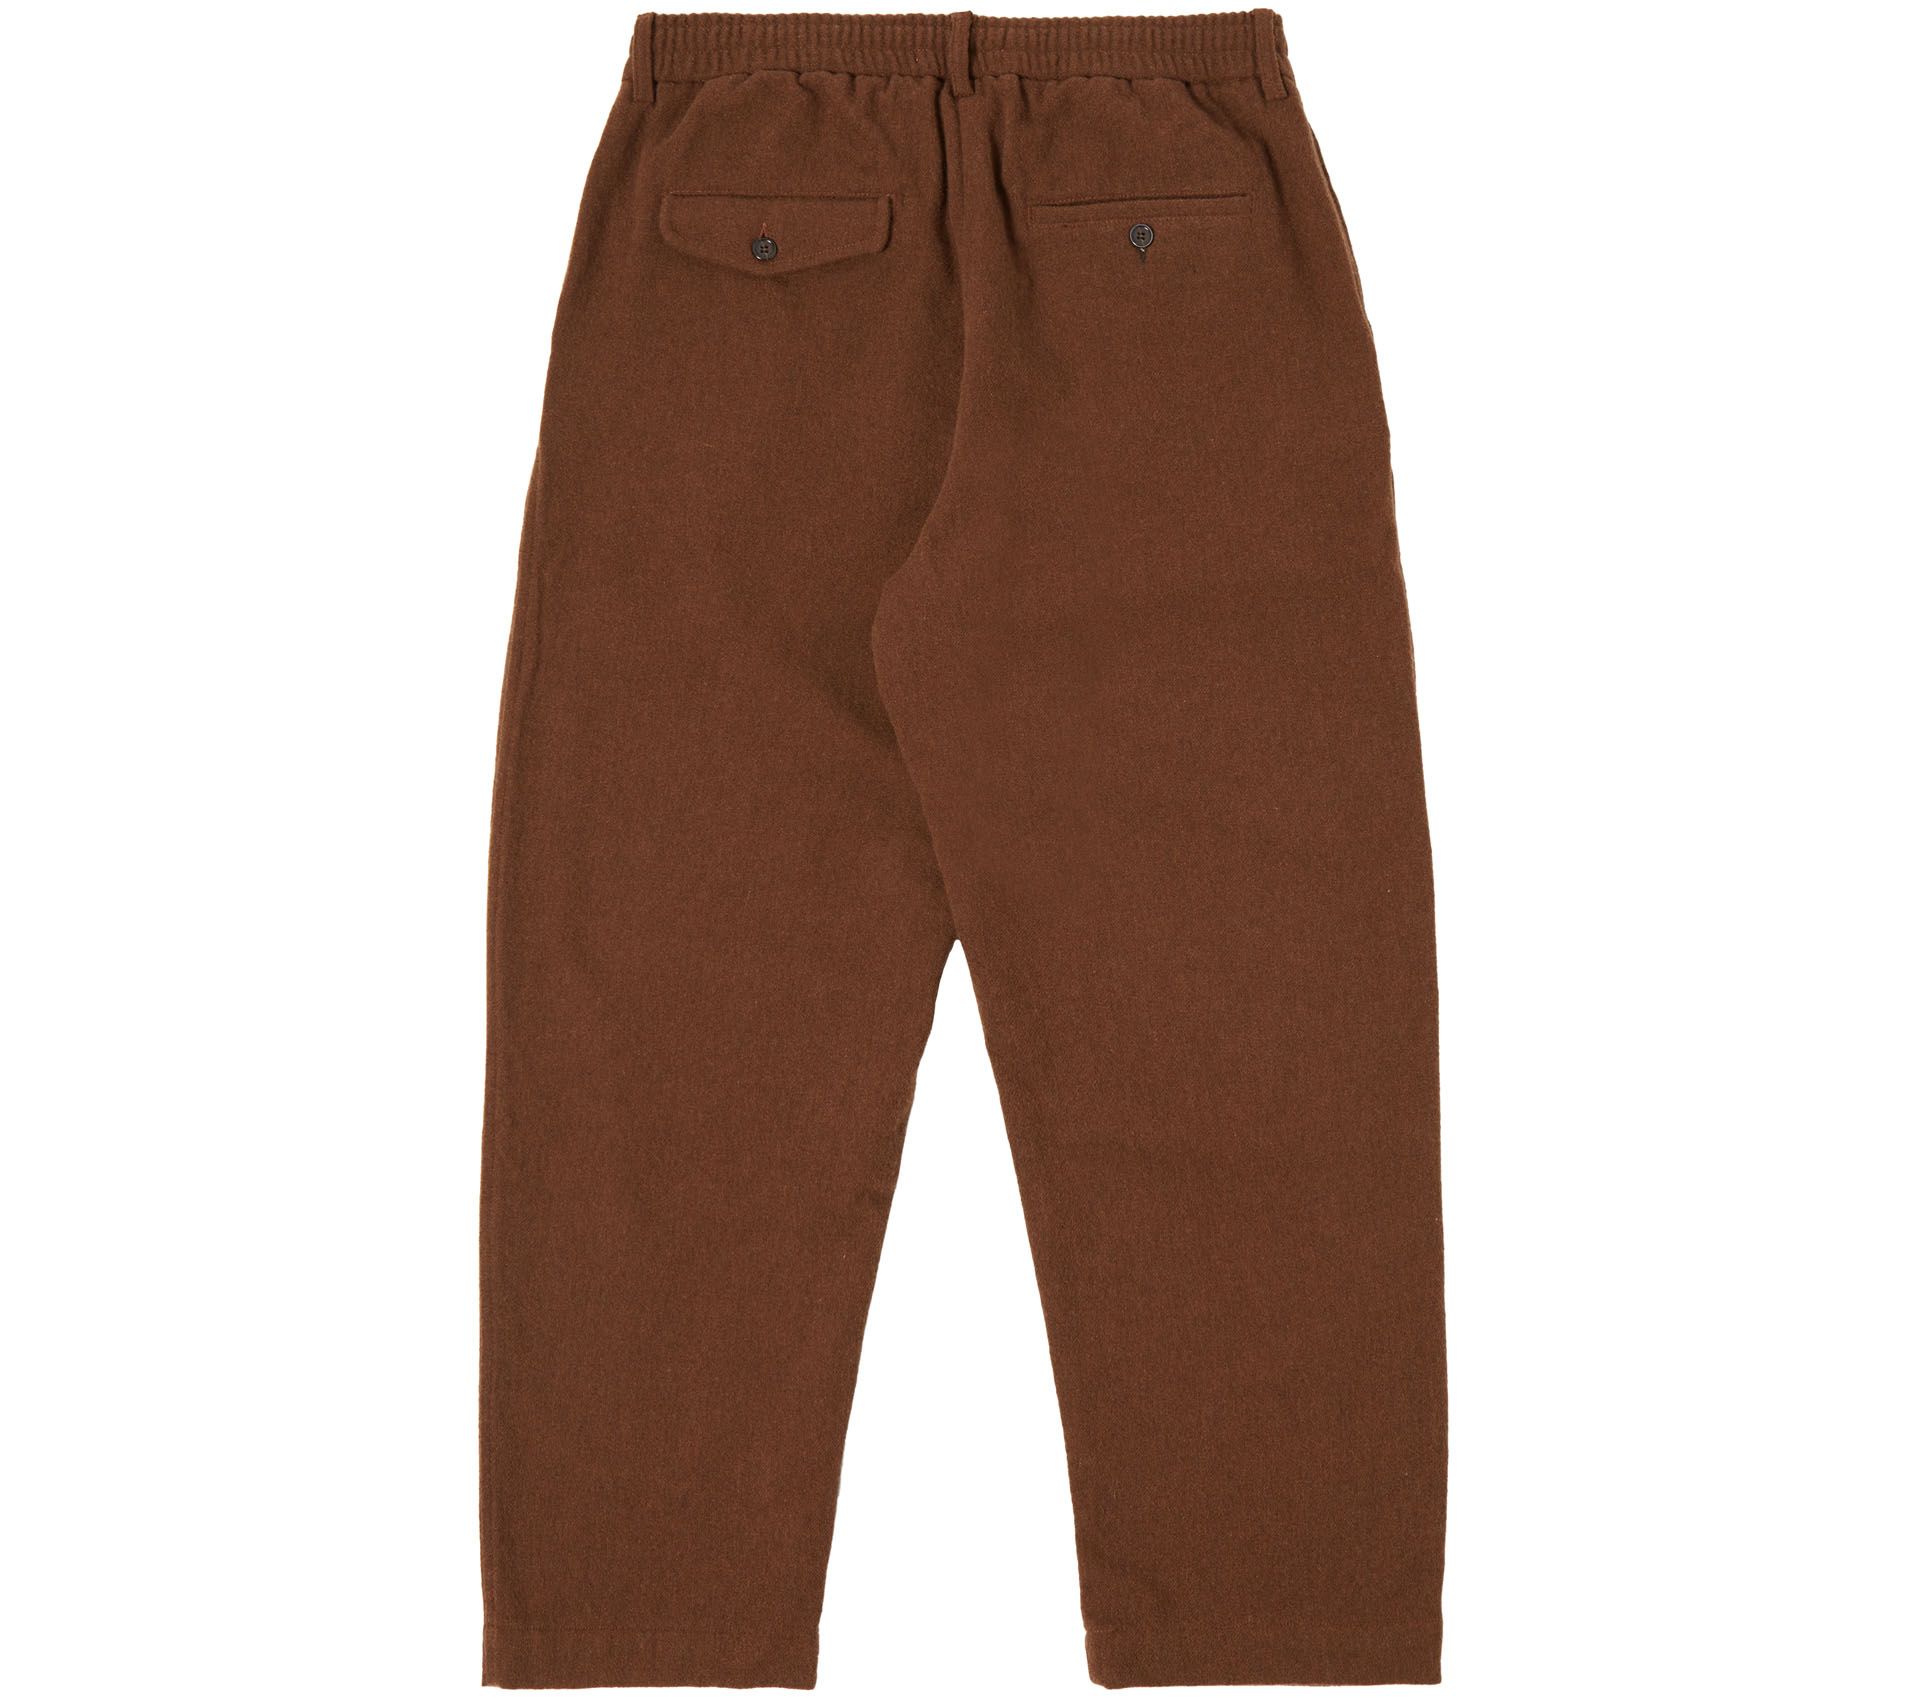 Image #1 of OXORD PANT